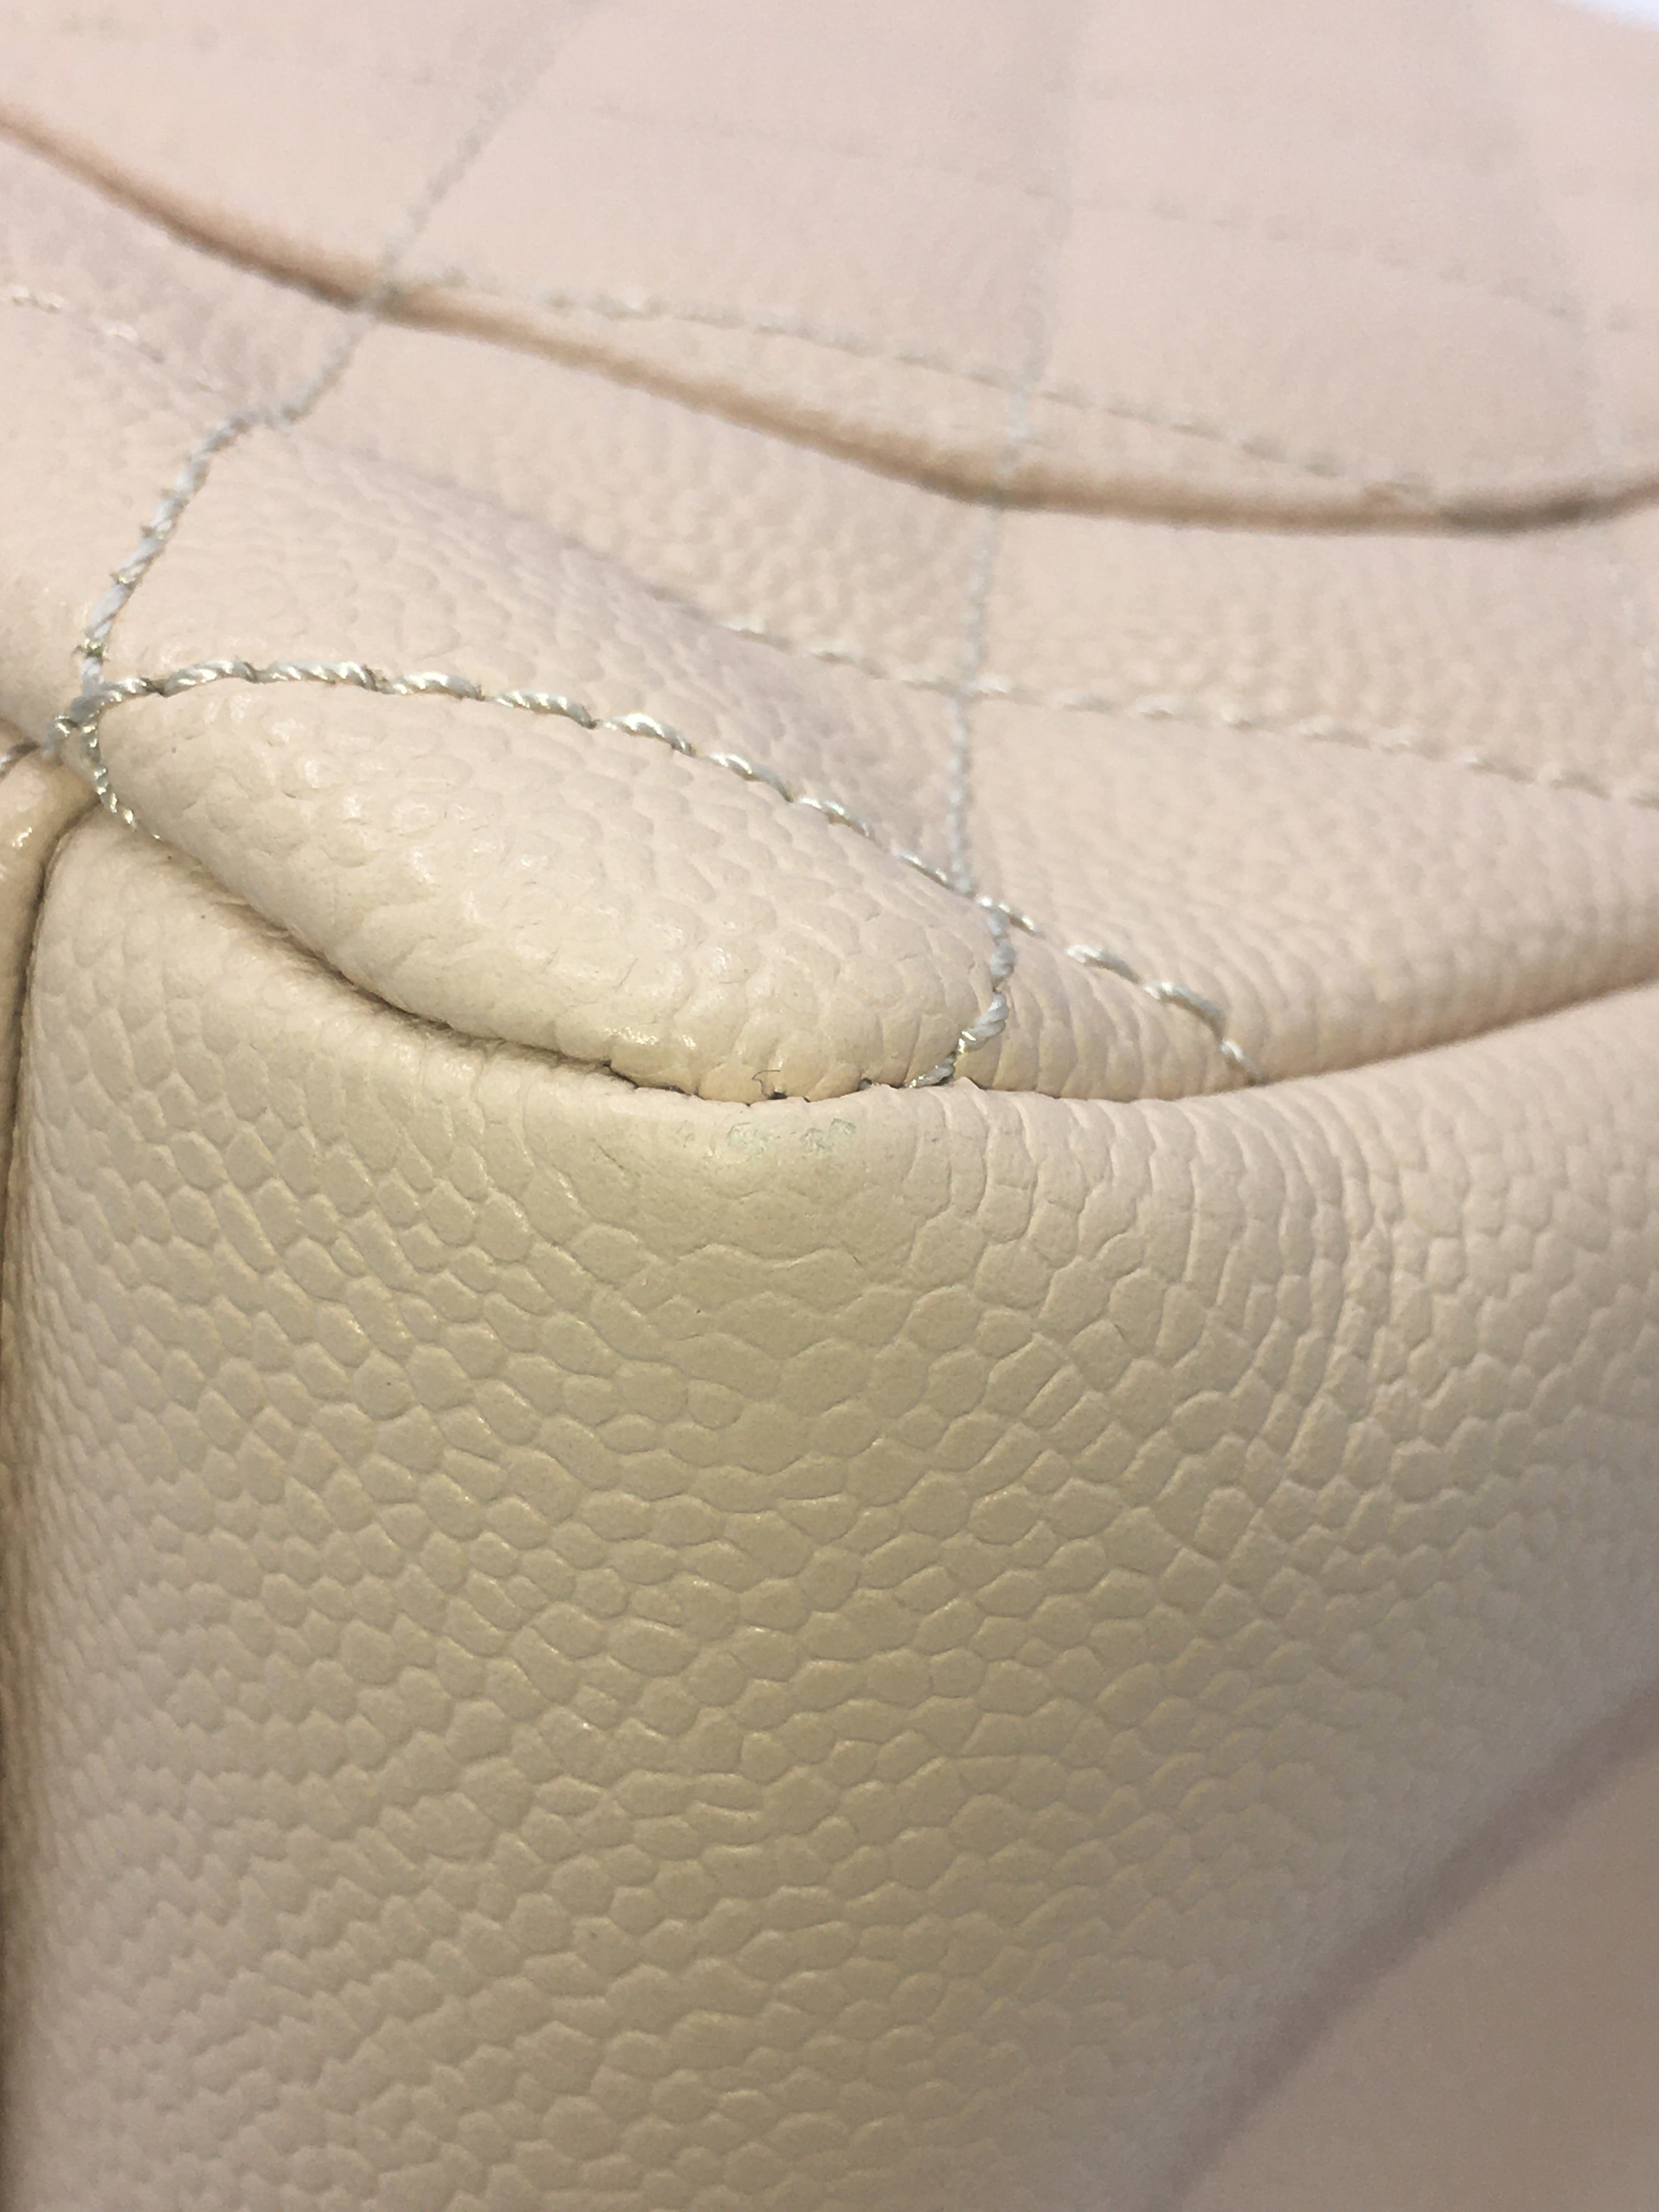 Médaillon leather tote Chanel Beige in Leather - 33084841